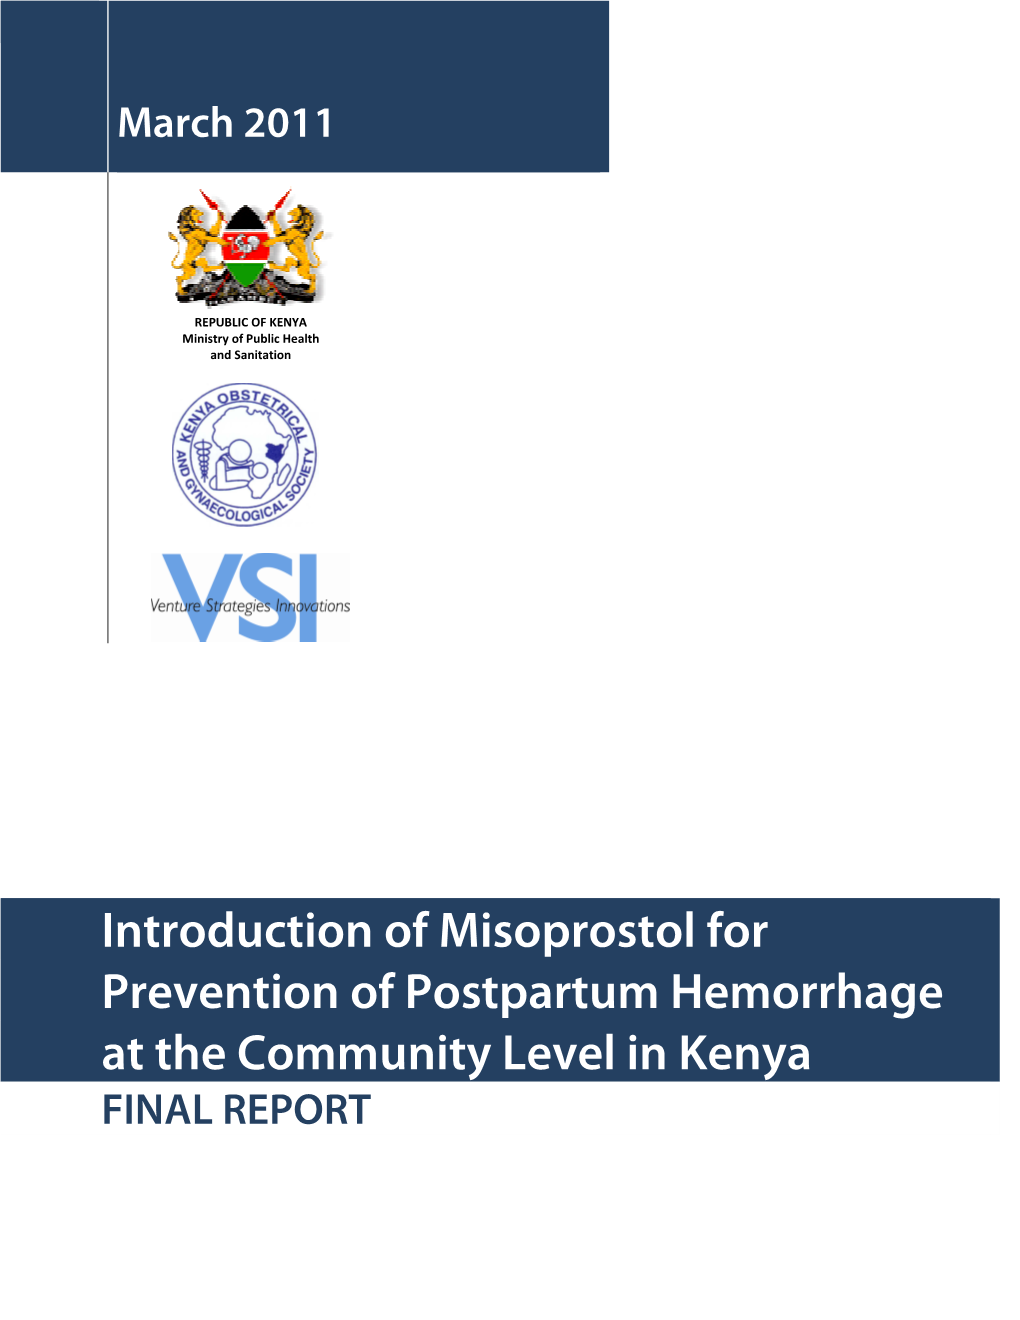 Introduction of Misoprostol for Prevention of Postpartum Hemorrhage at the Community Level in Kenya FINAL REPORT